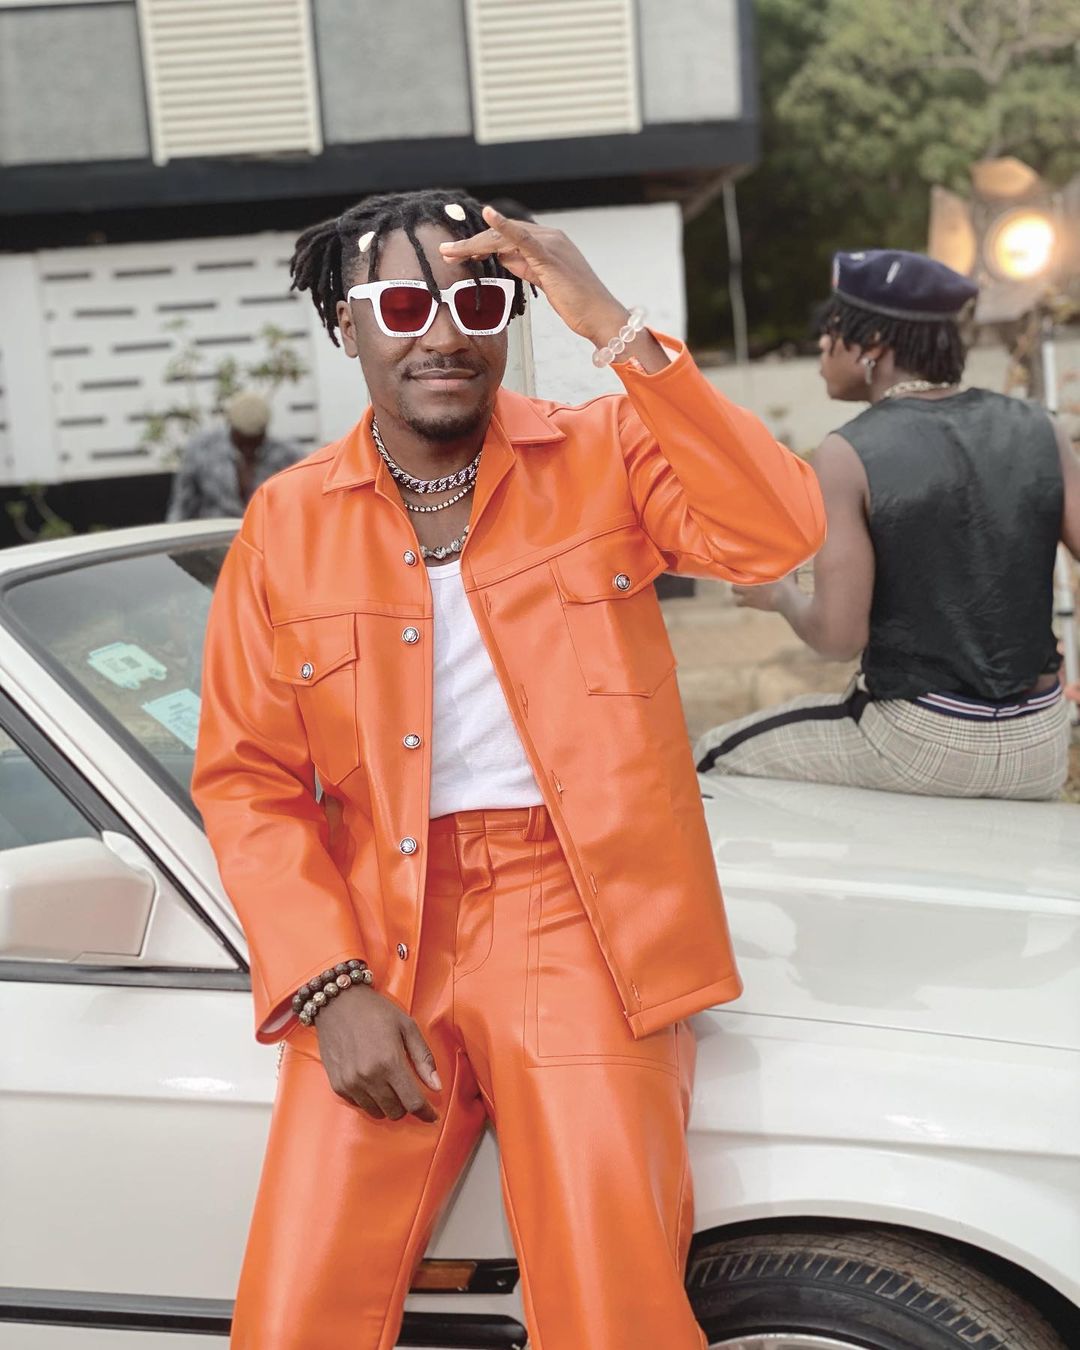 For 7 years, No Artiste Paid Me For My Work - GuiltyBeatz